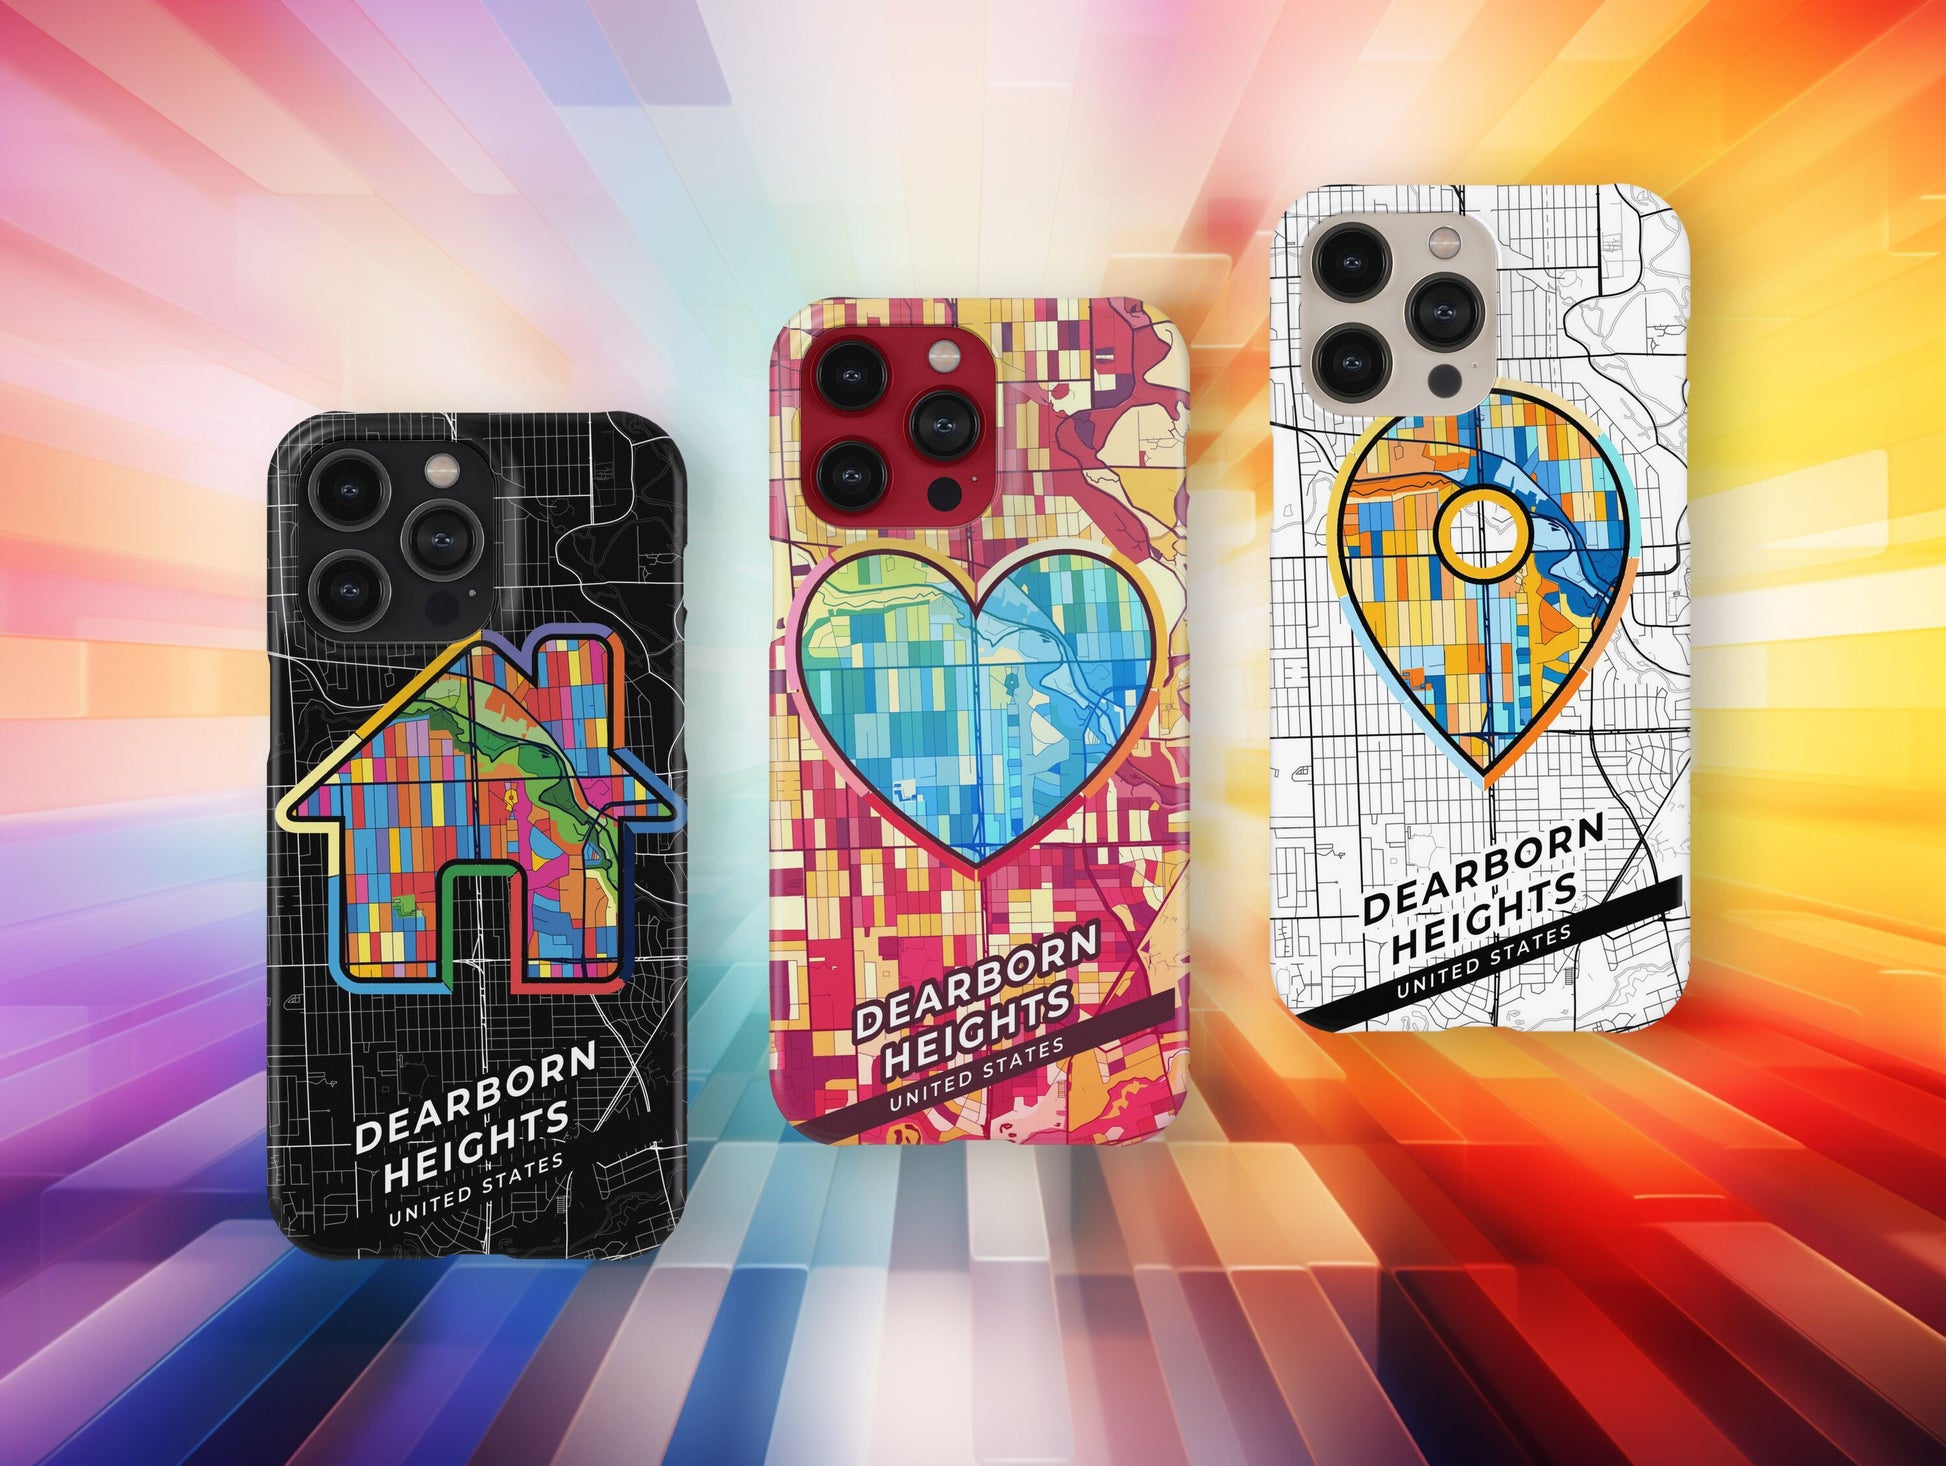 Dearborn Heights Michigan slim phone case with colorful icon. Birthday, wedding or housewarming gift. Couple match cases.